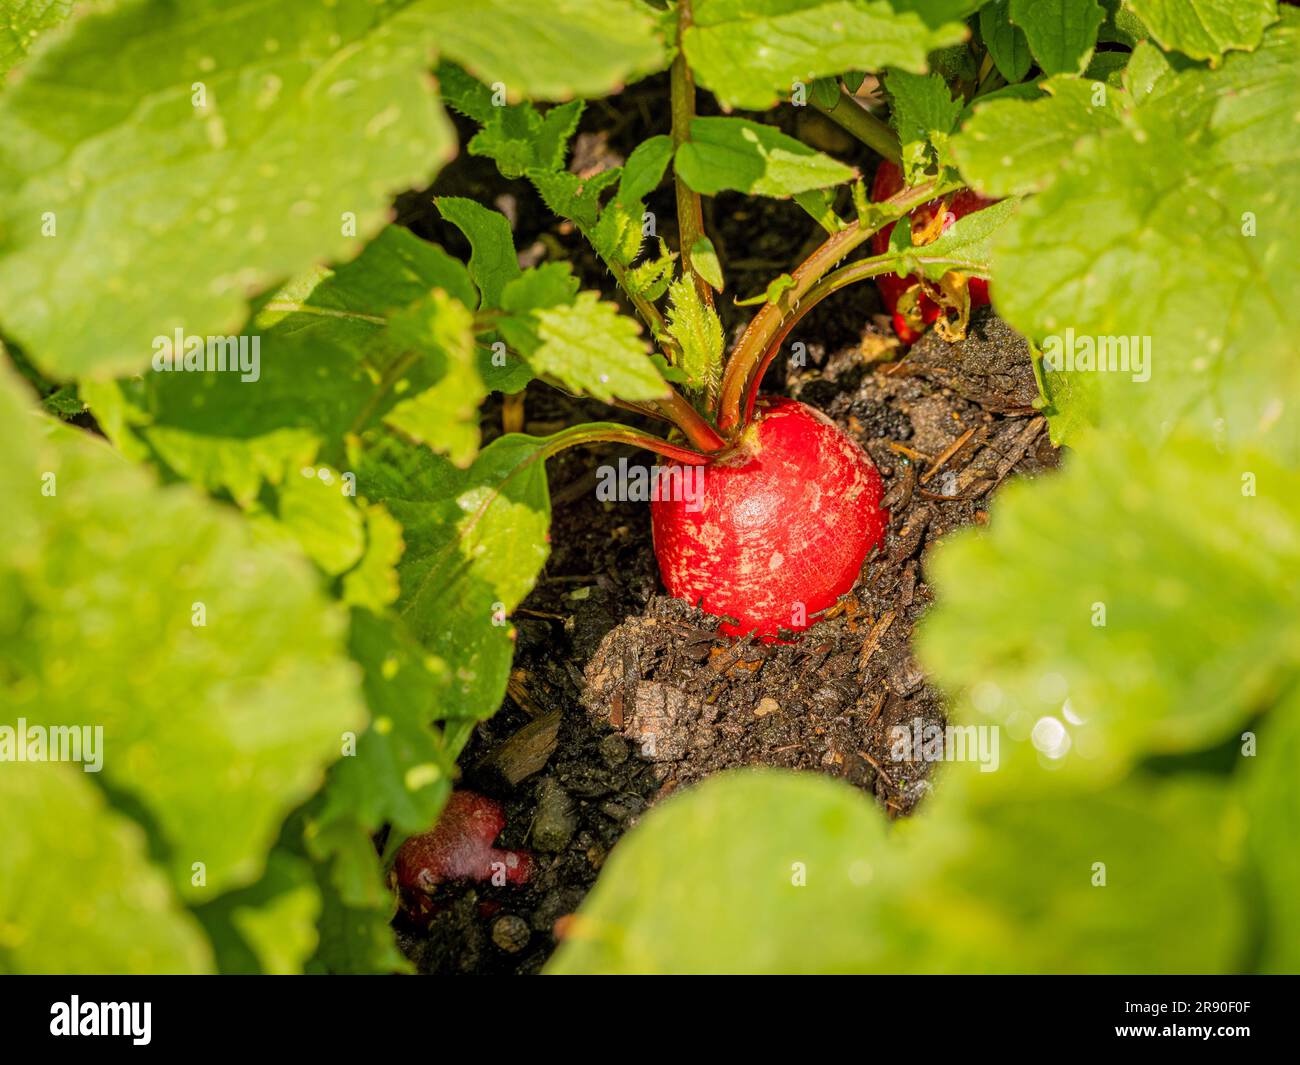 Close-up of a red radish growing in the ground. Stock Photo